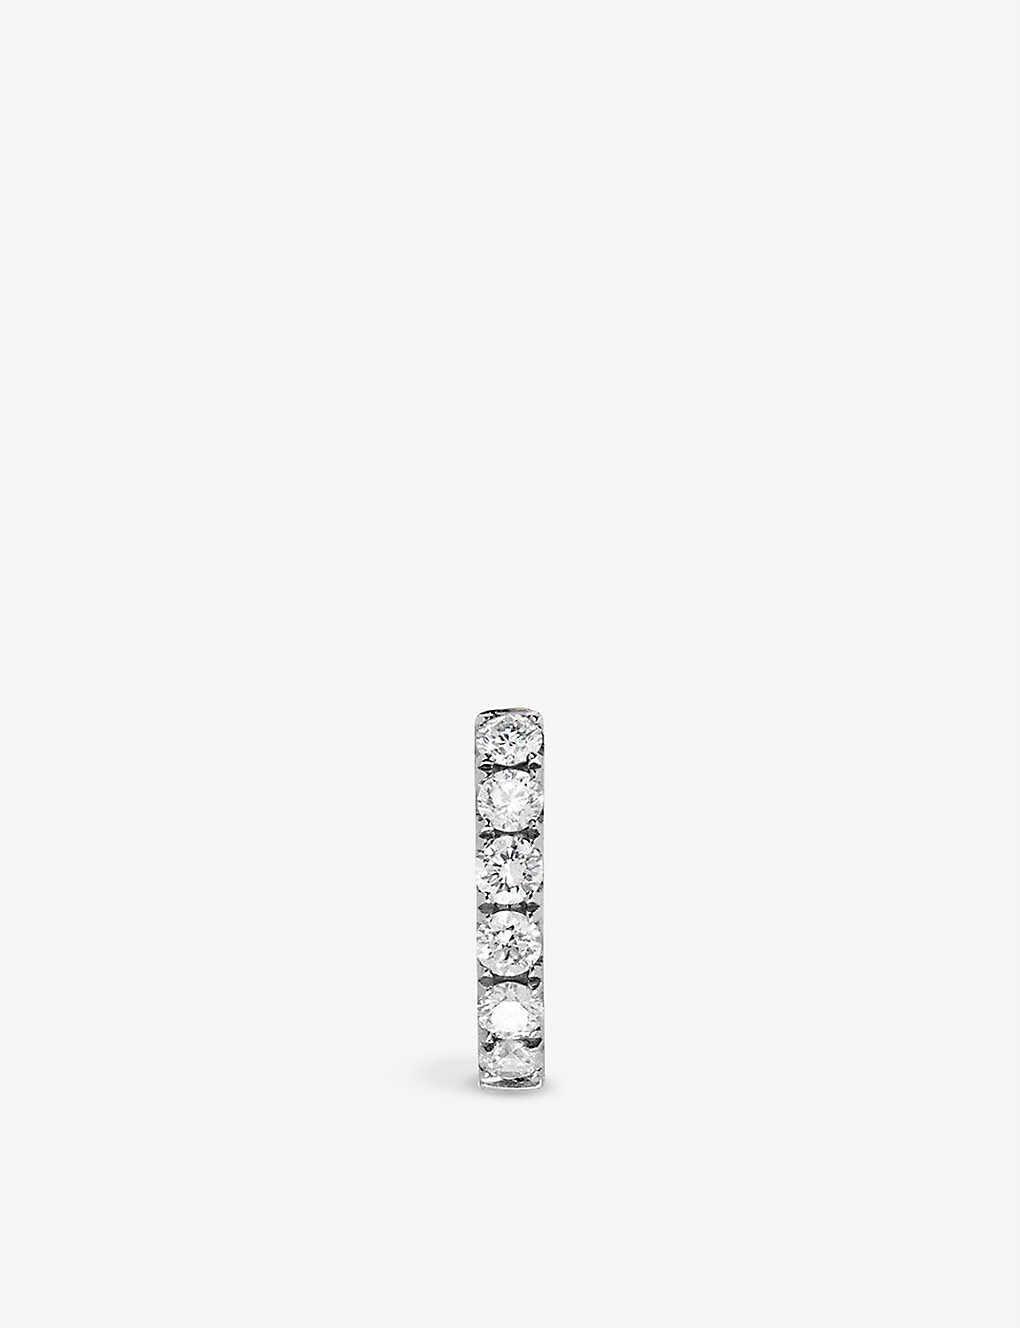 ROXANNE FIRST ROXANNE FIRST WOMENS WHITE GOLD SMALL CHUBBY 14CT WHITE-GOLD AND 0.15CT BRILLIANT-CUT DIAMOND SINGLE,63600699